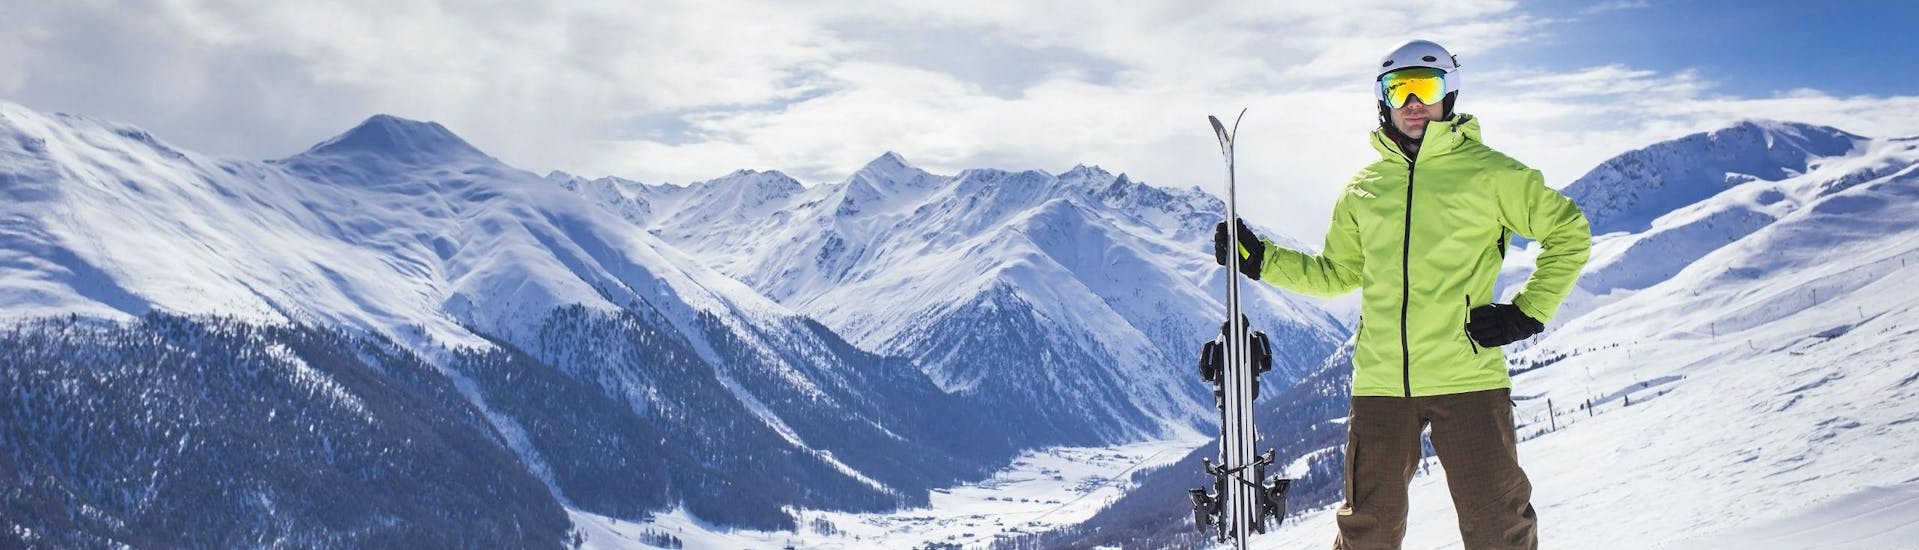 A skier is posing on one of the ski slopes in Livigno, overlooking the snow-covered ski resort from the top of the mountain.